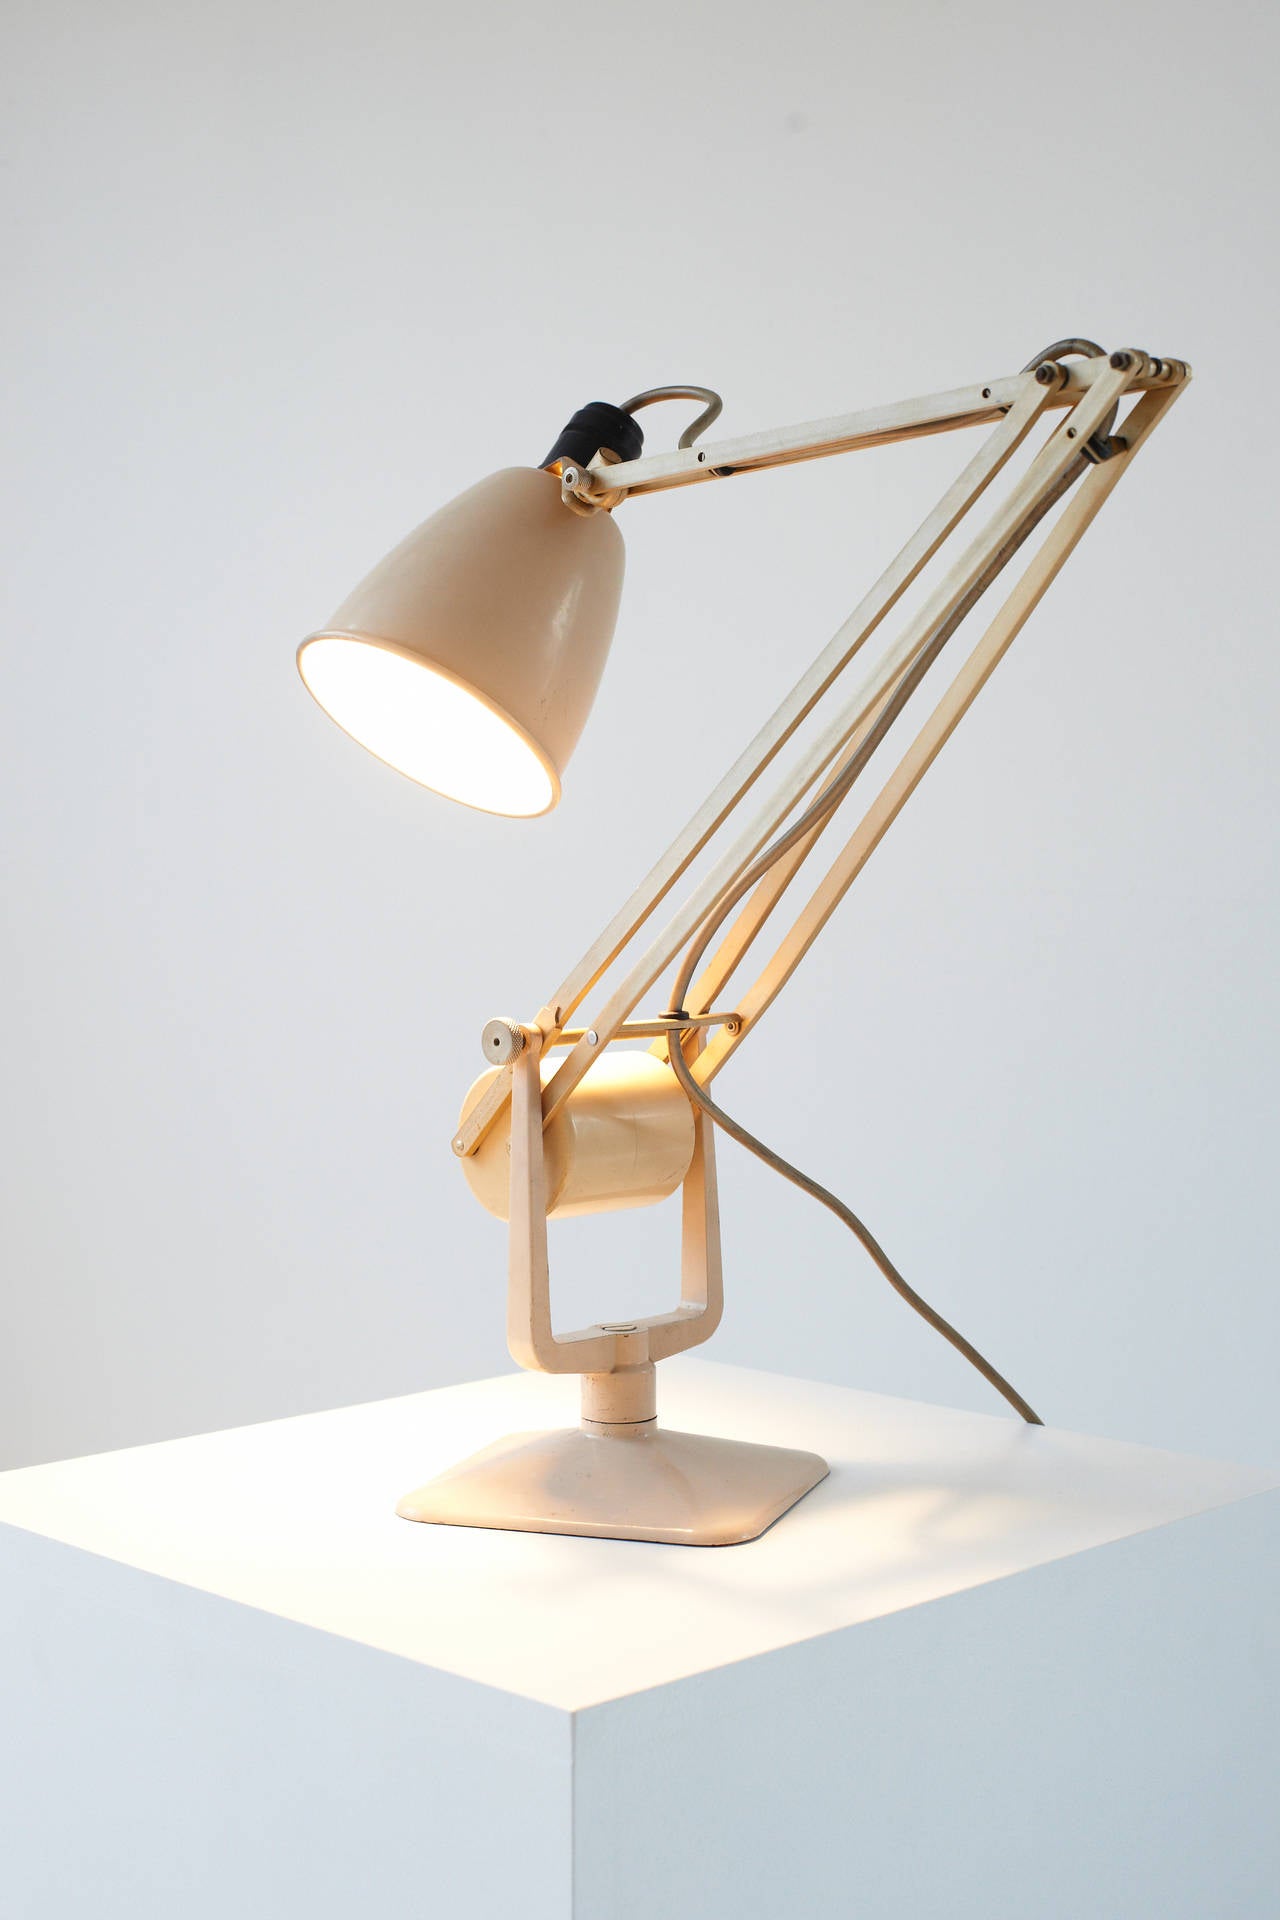 Altough there are similarities to Herbert Terry's iconic Anglepoise lamp this design predates it at in our opinion is more accomplished. An ingenious piece of industrial design, the rolling counterweight enables the lamp to hold its position without